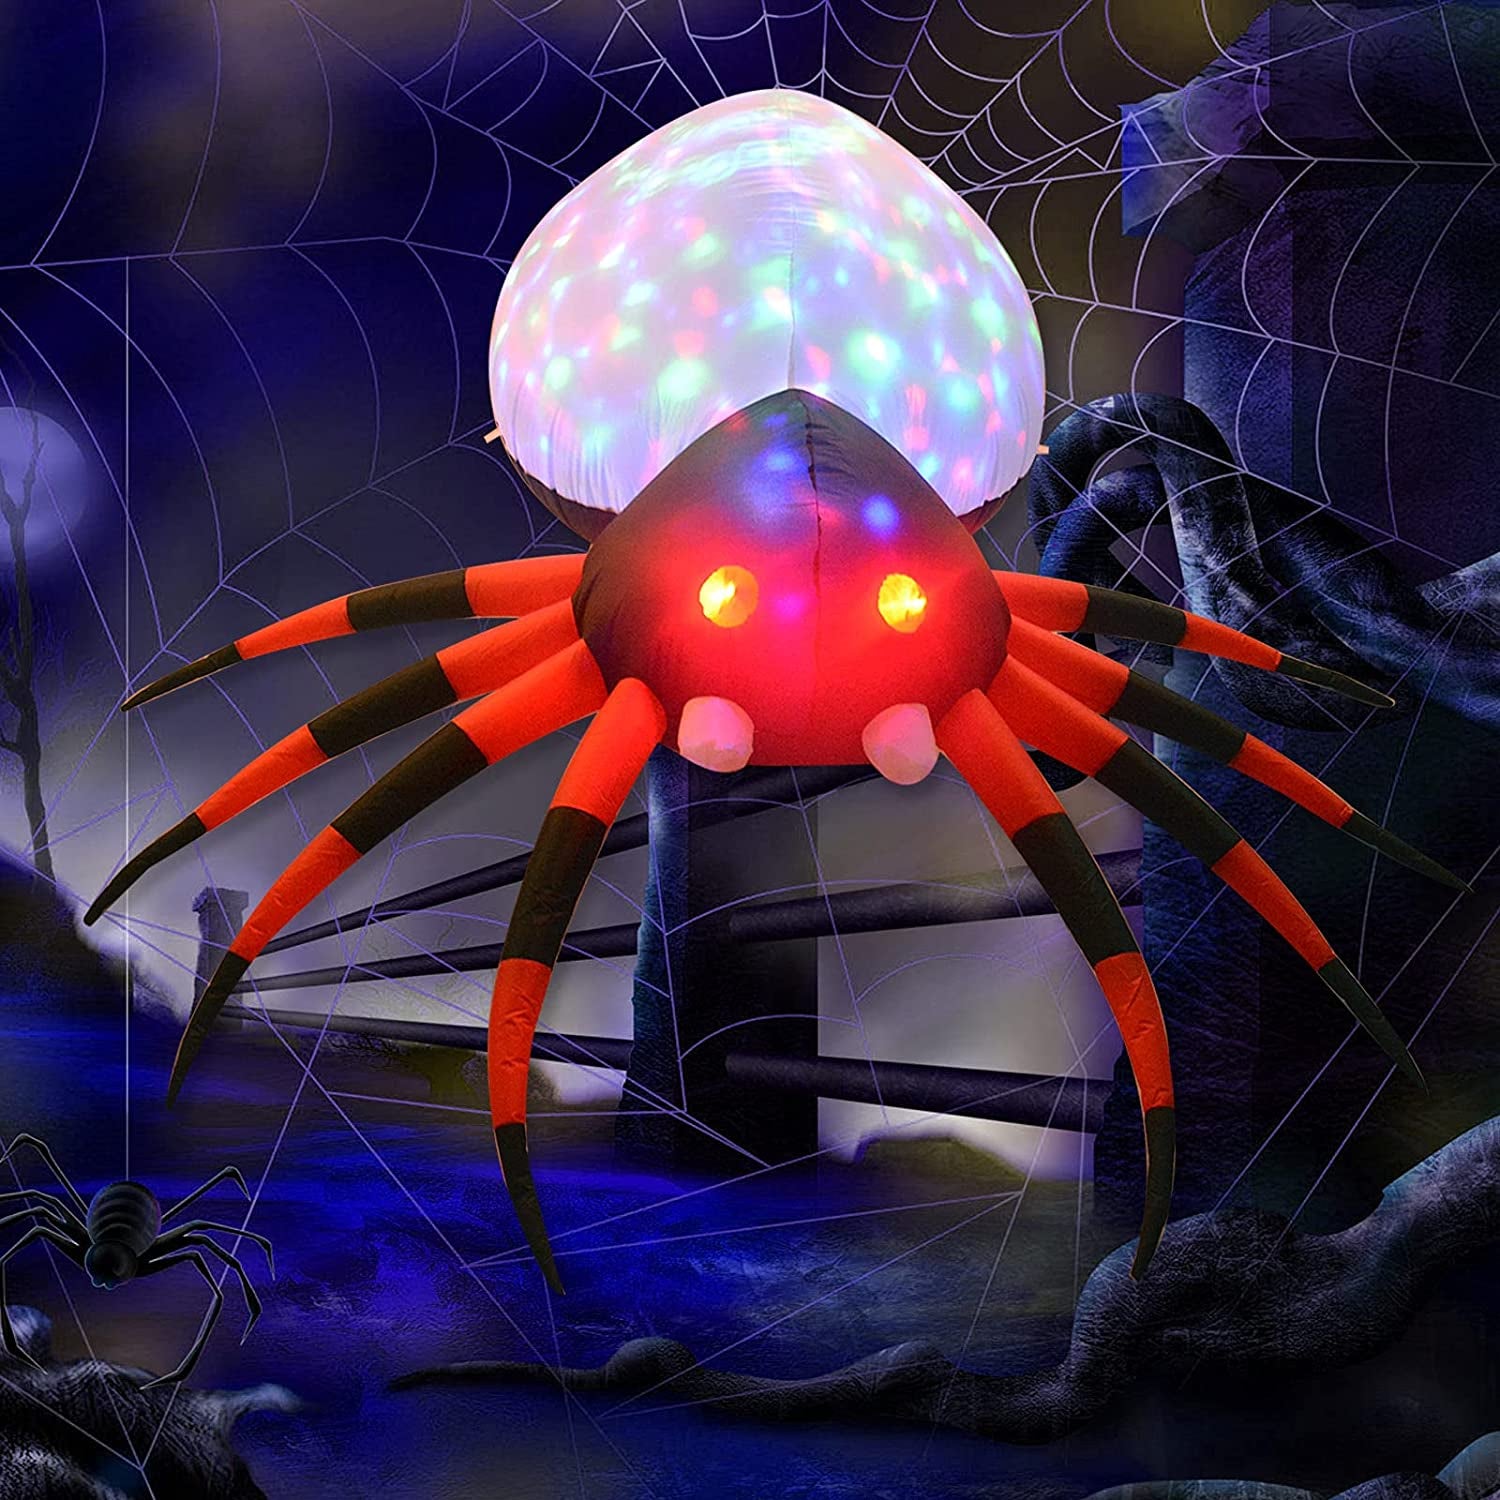 GOOSH, GOOSH 8 FT Width Halloween Inflatables Outdoor Spider with Magic Light, Blow up Yard Decoration Clearance with LED Lights Built-In for Holiday/Party/Yard/Garden